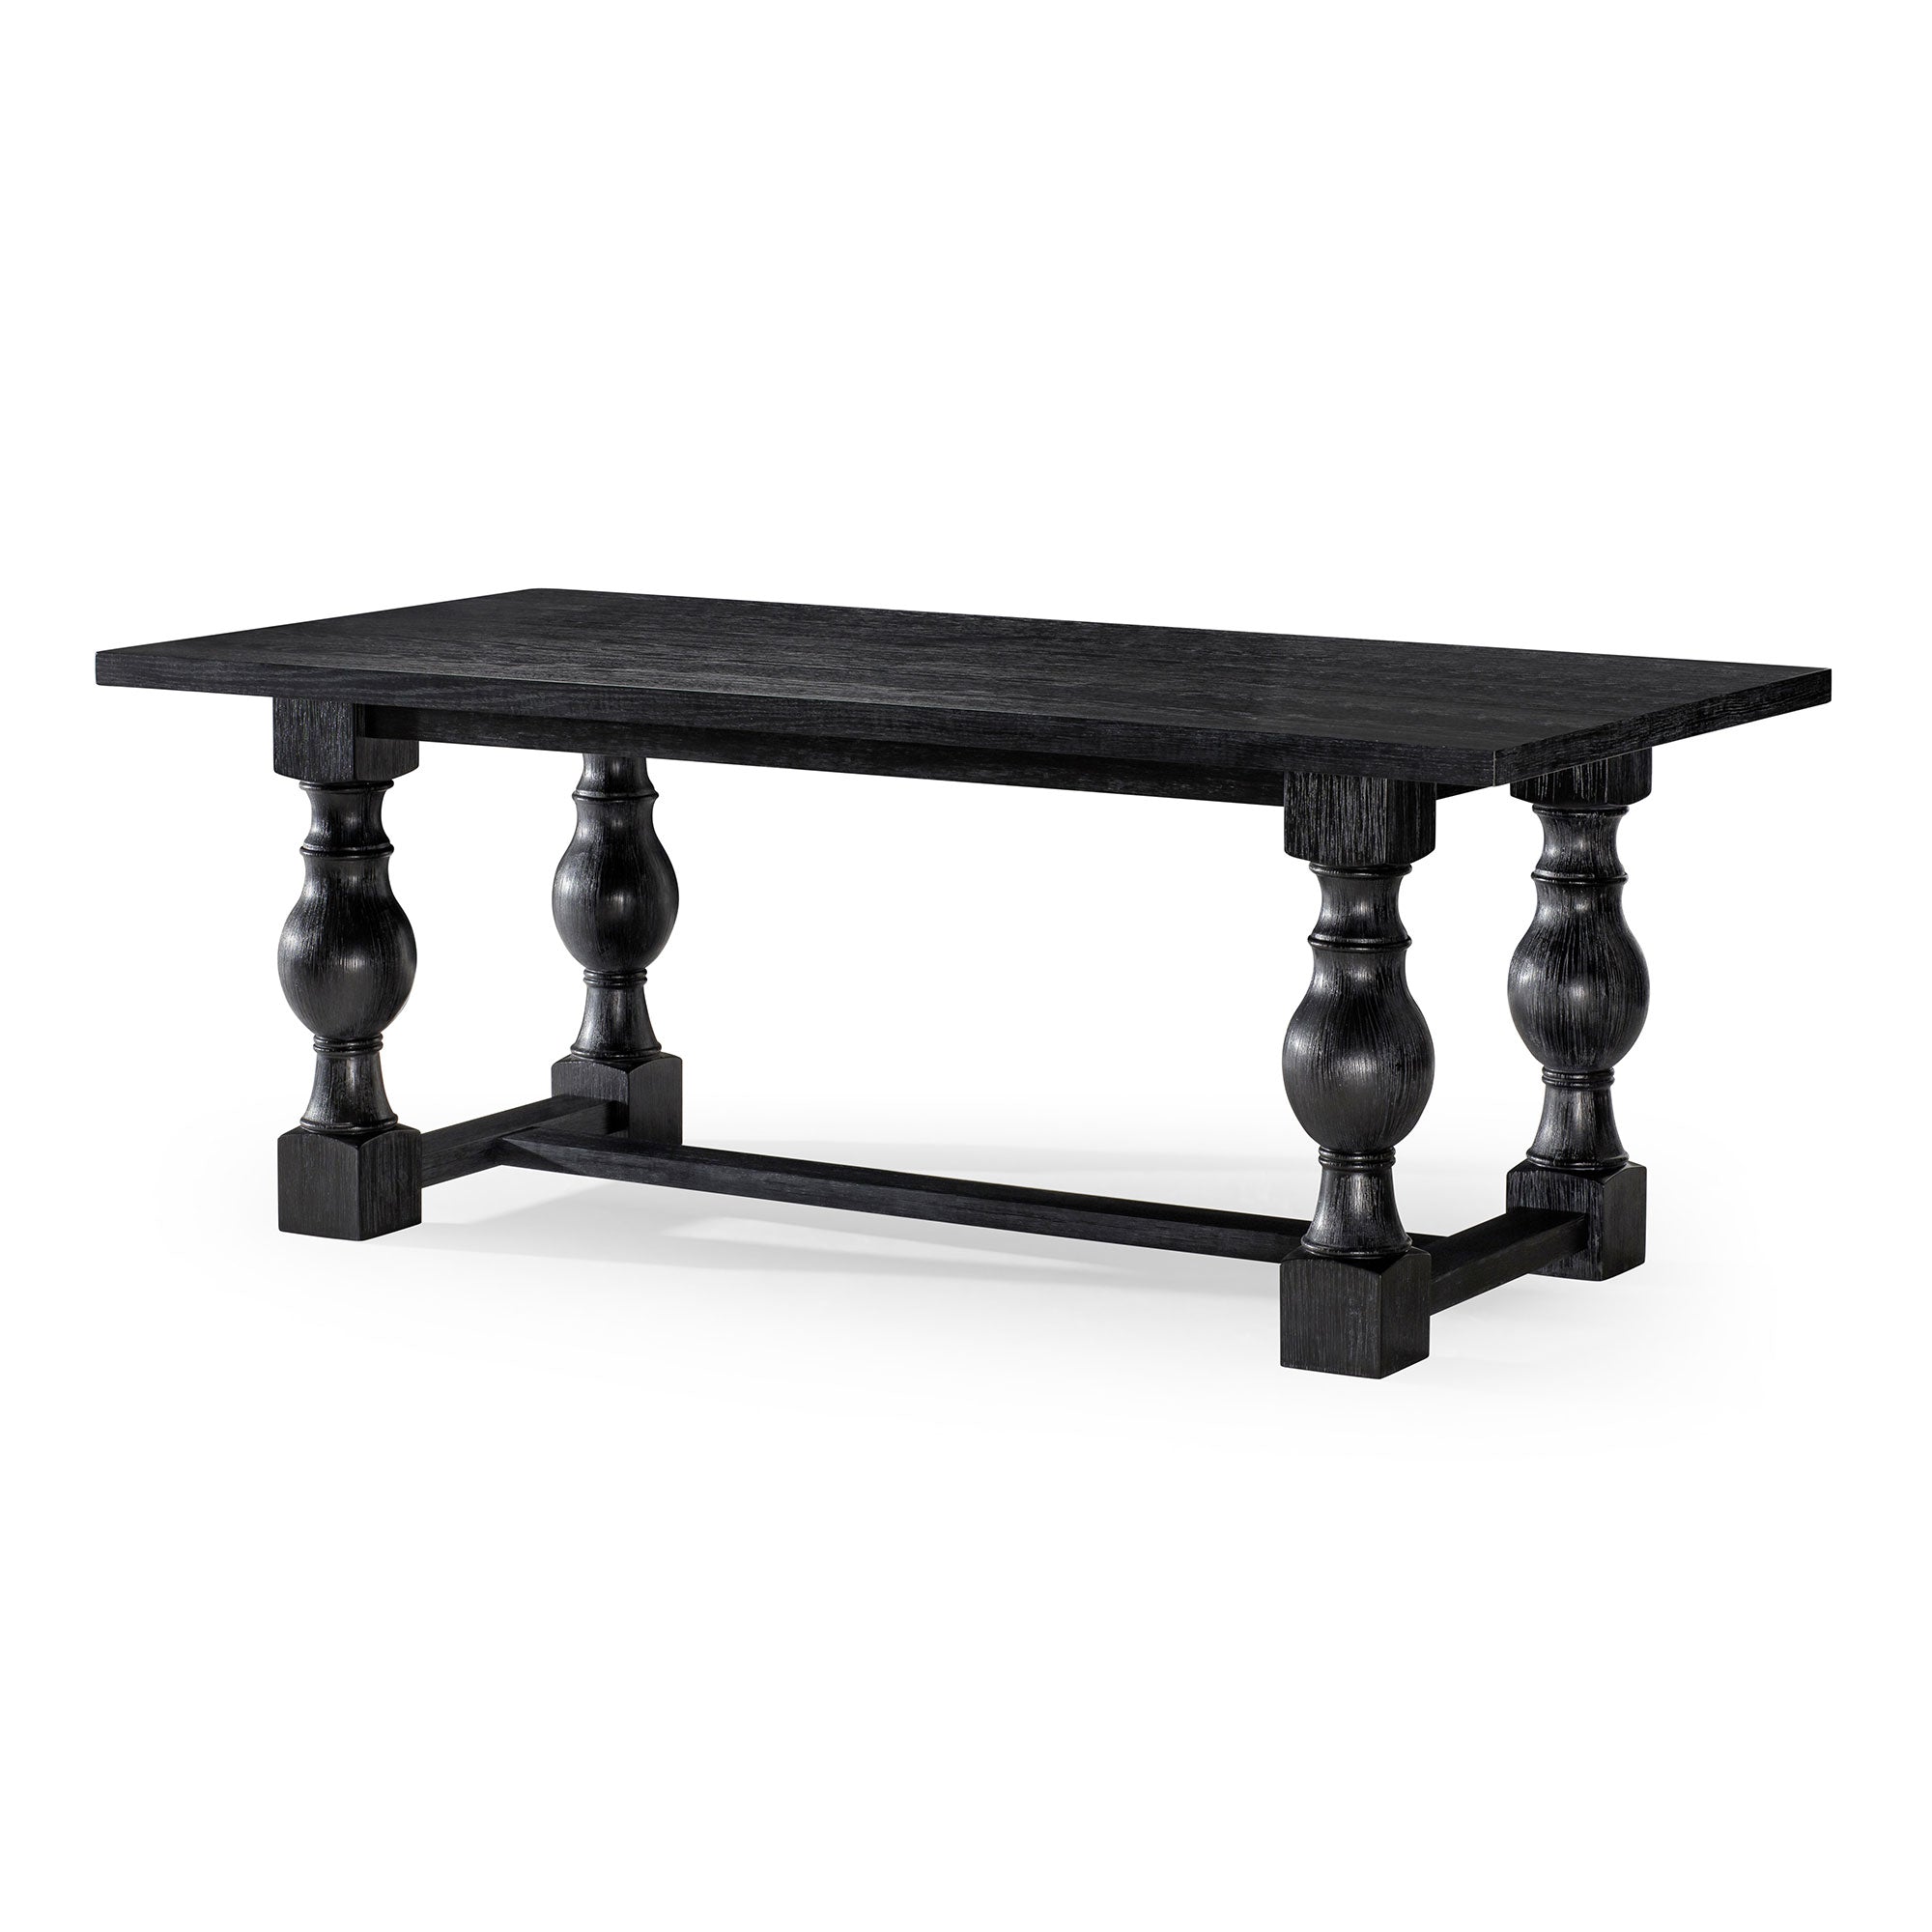 Leon Classical Wooden Dining Table in Antiqued Black Finish